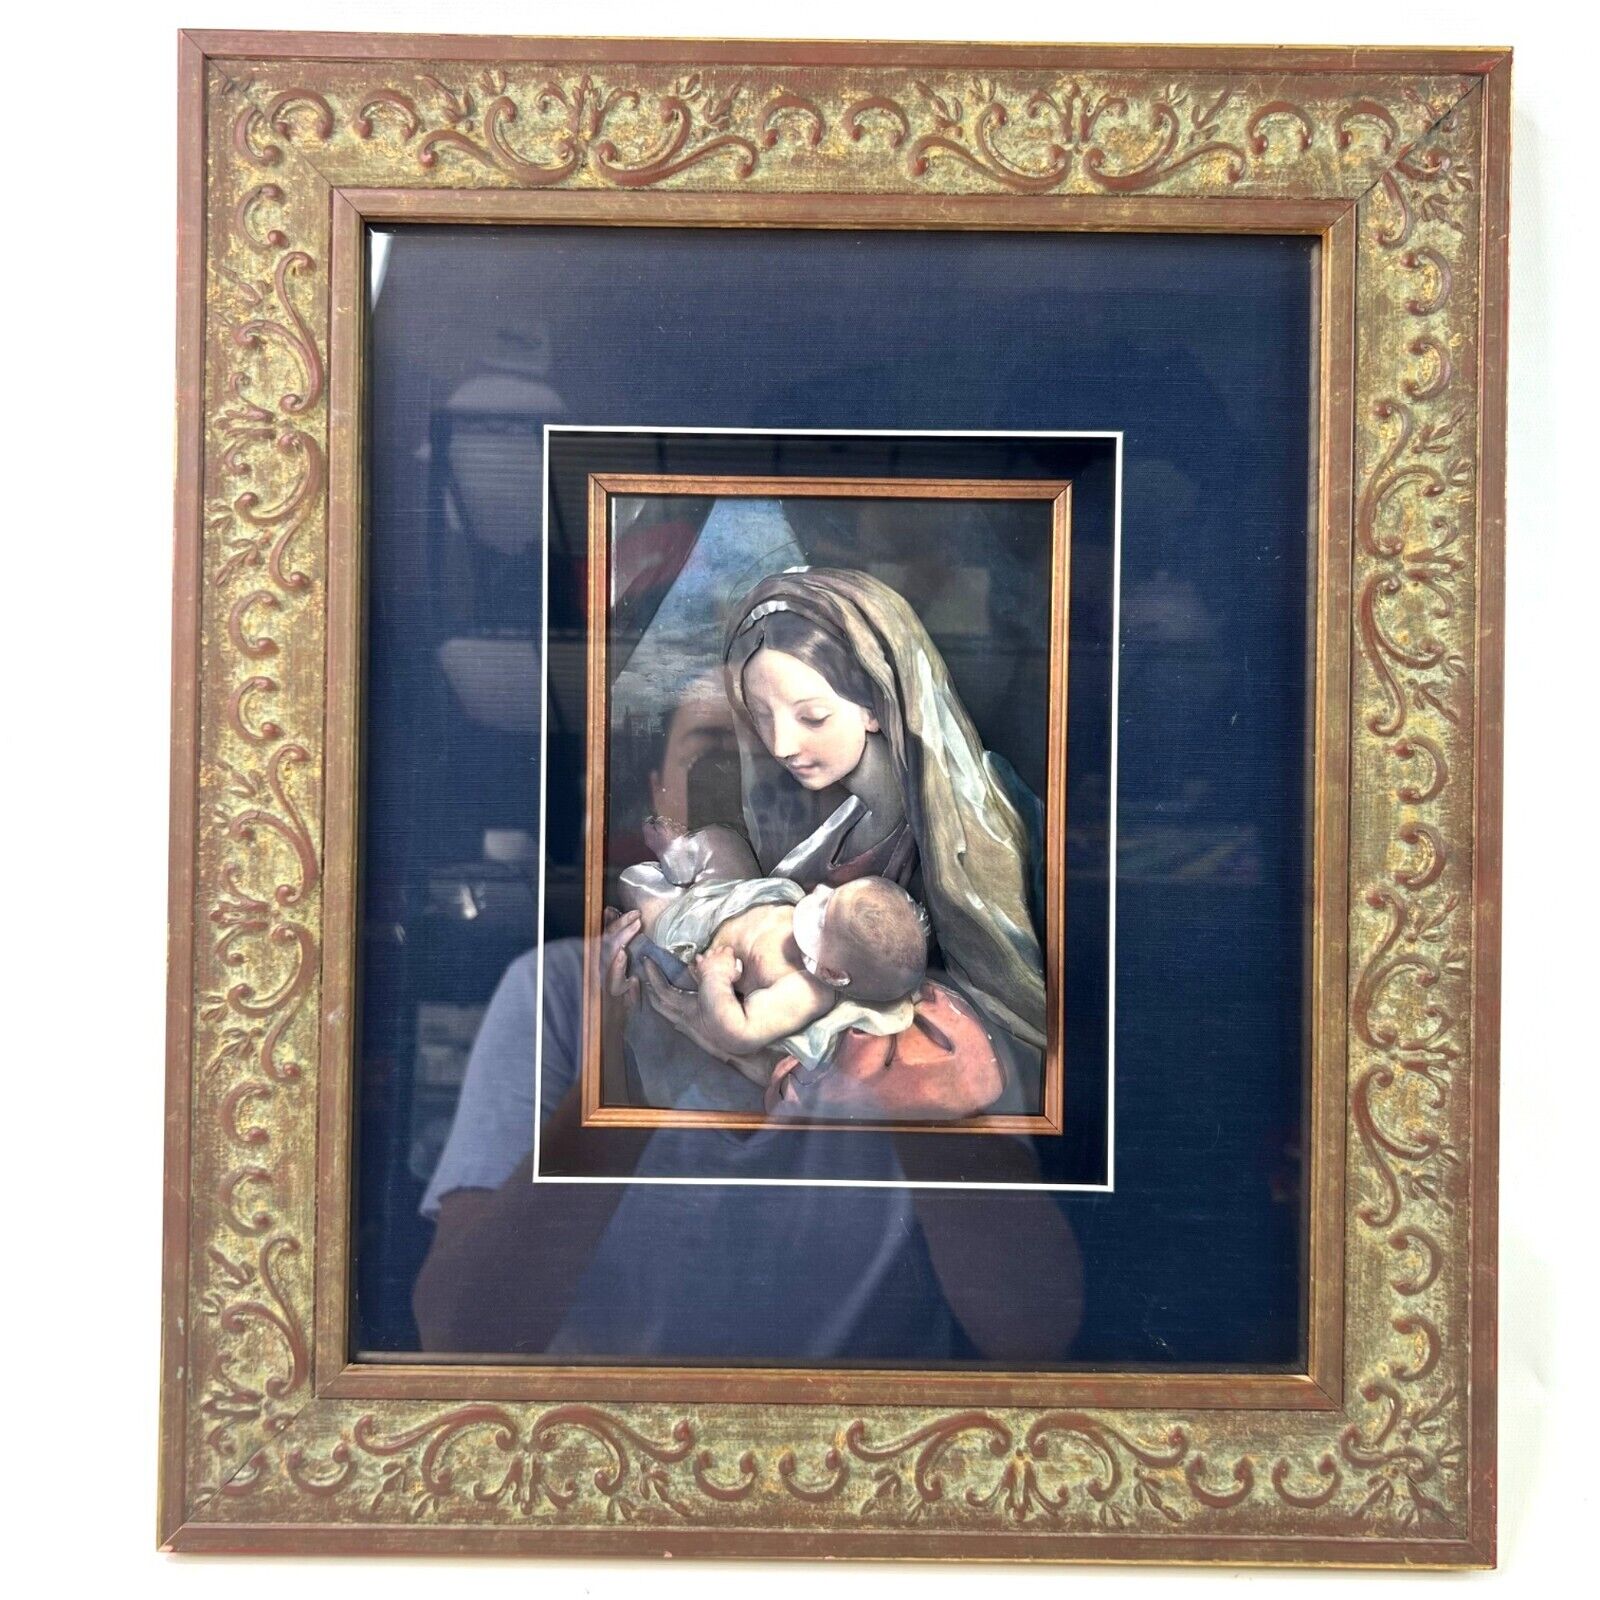 3D Madonna and Child Framed Wall Art Erich Lessing Religious Unique Wood Scroll